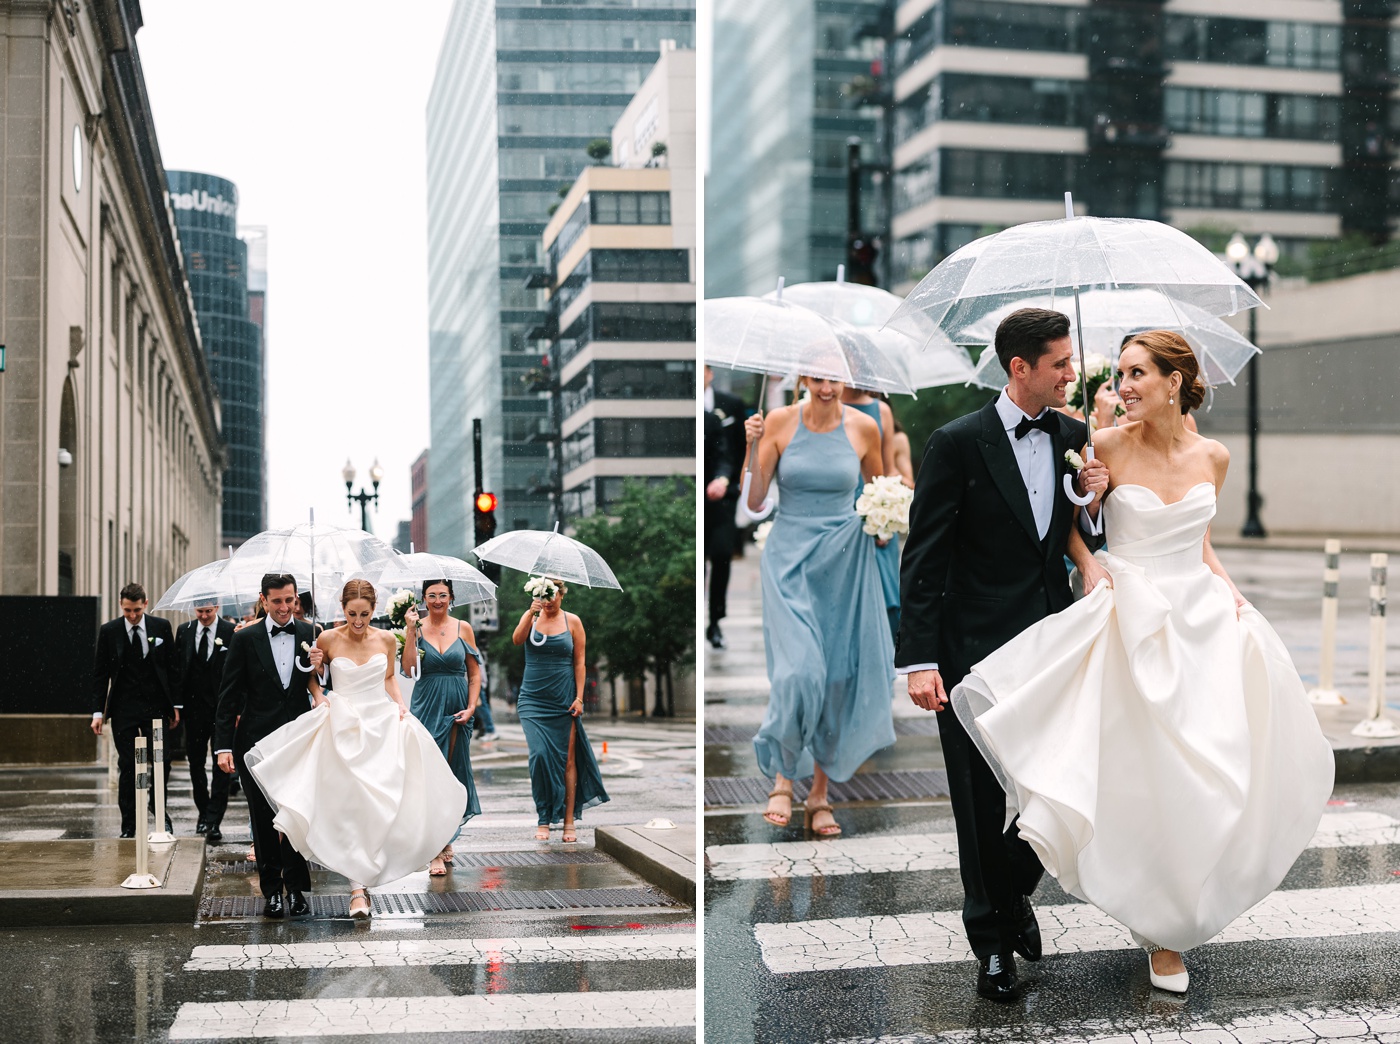 Bridal party portraits in downtown Chicago
